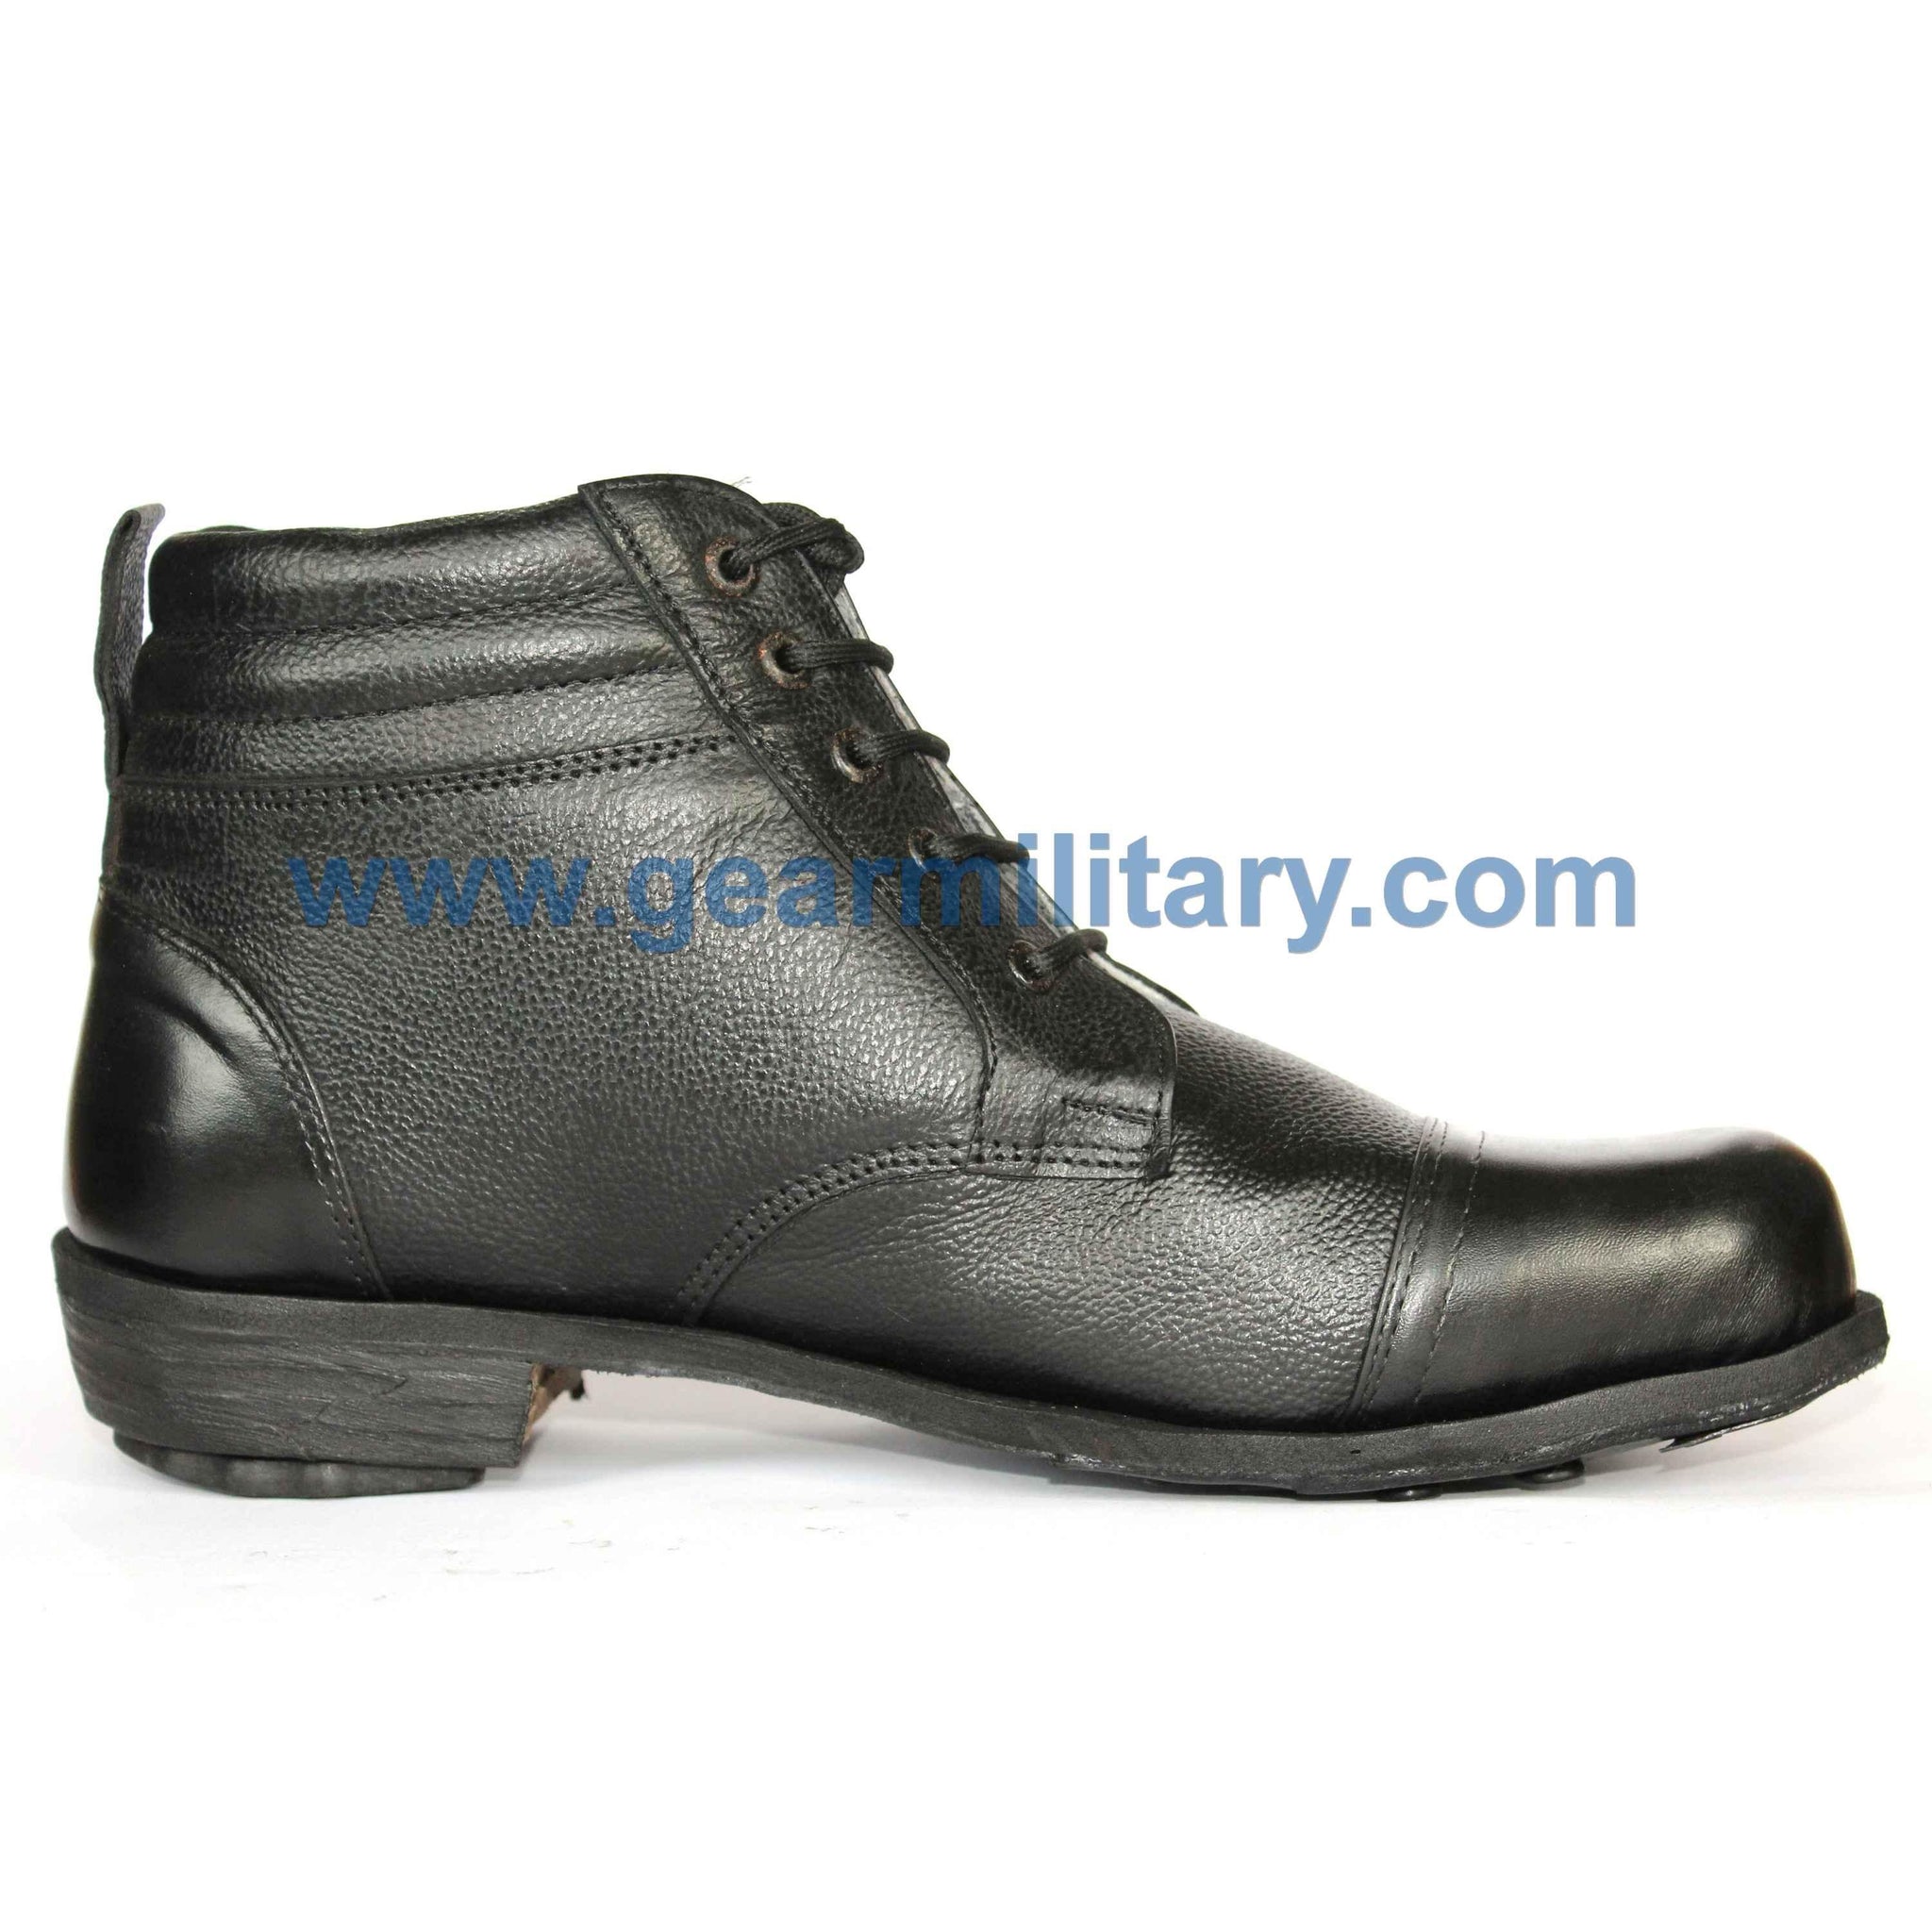 Buy Military boots for Men in India| Buy Online Tactical Boots for Men